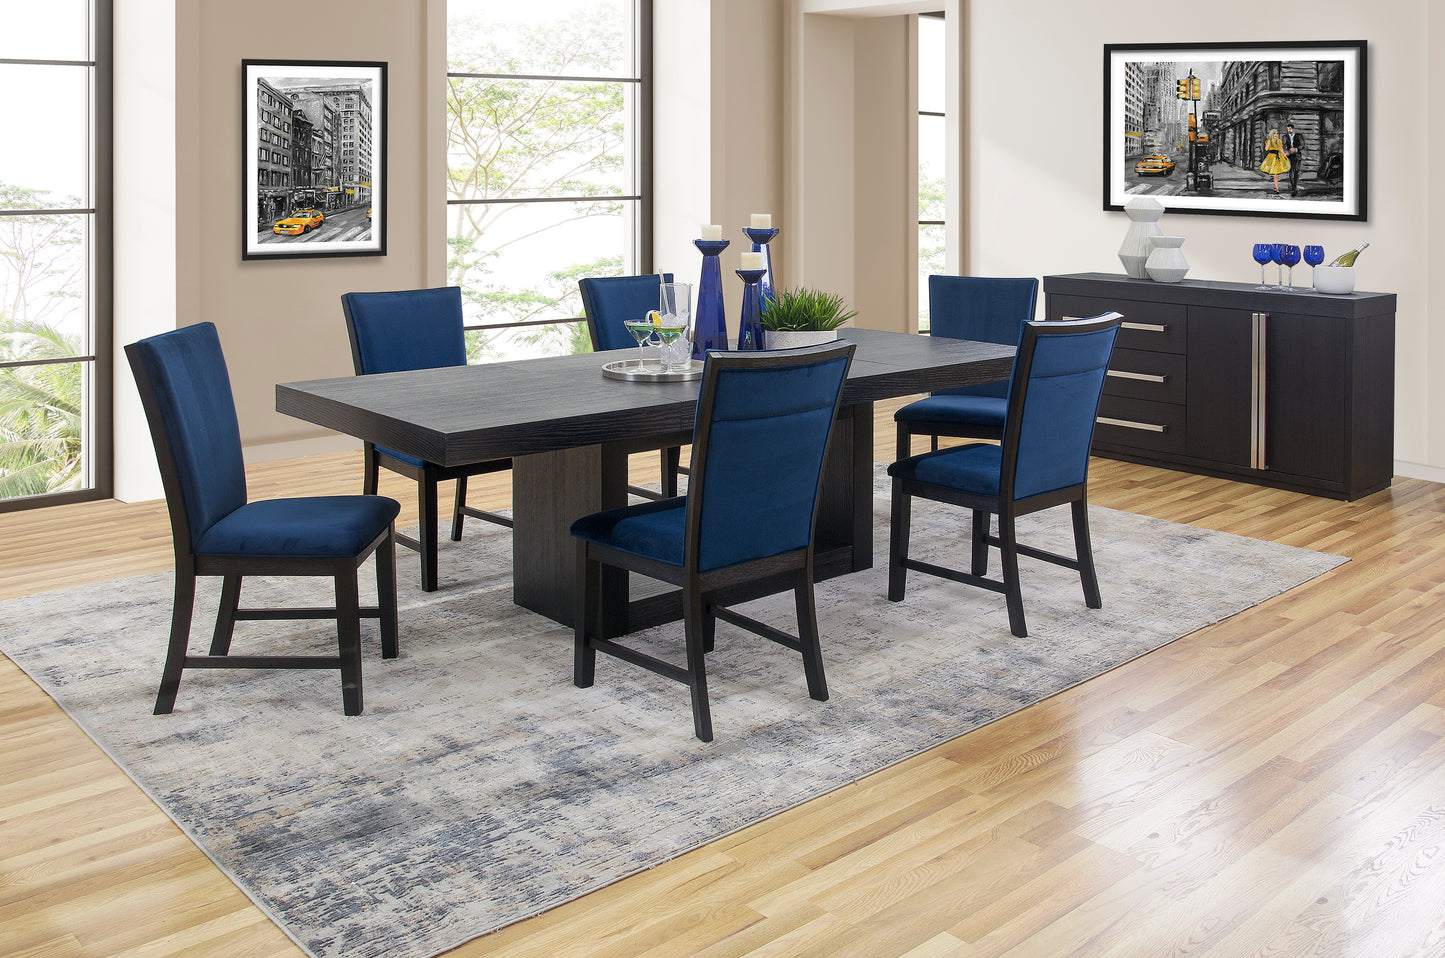 Cosmopolitan 5 Piece Rectangular Dining Set with Upholstered Back Navy Chairs